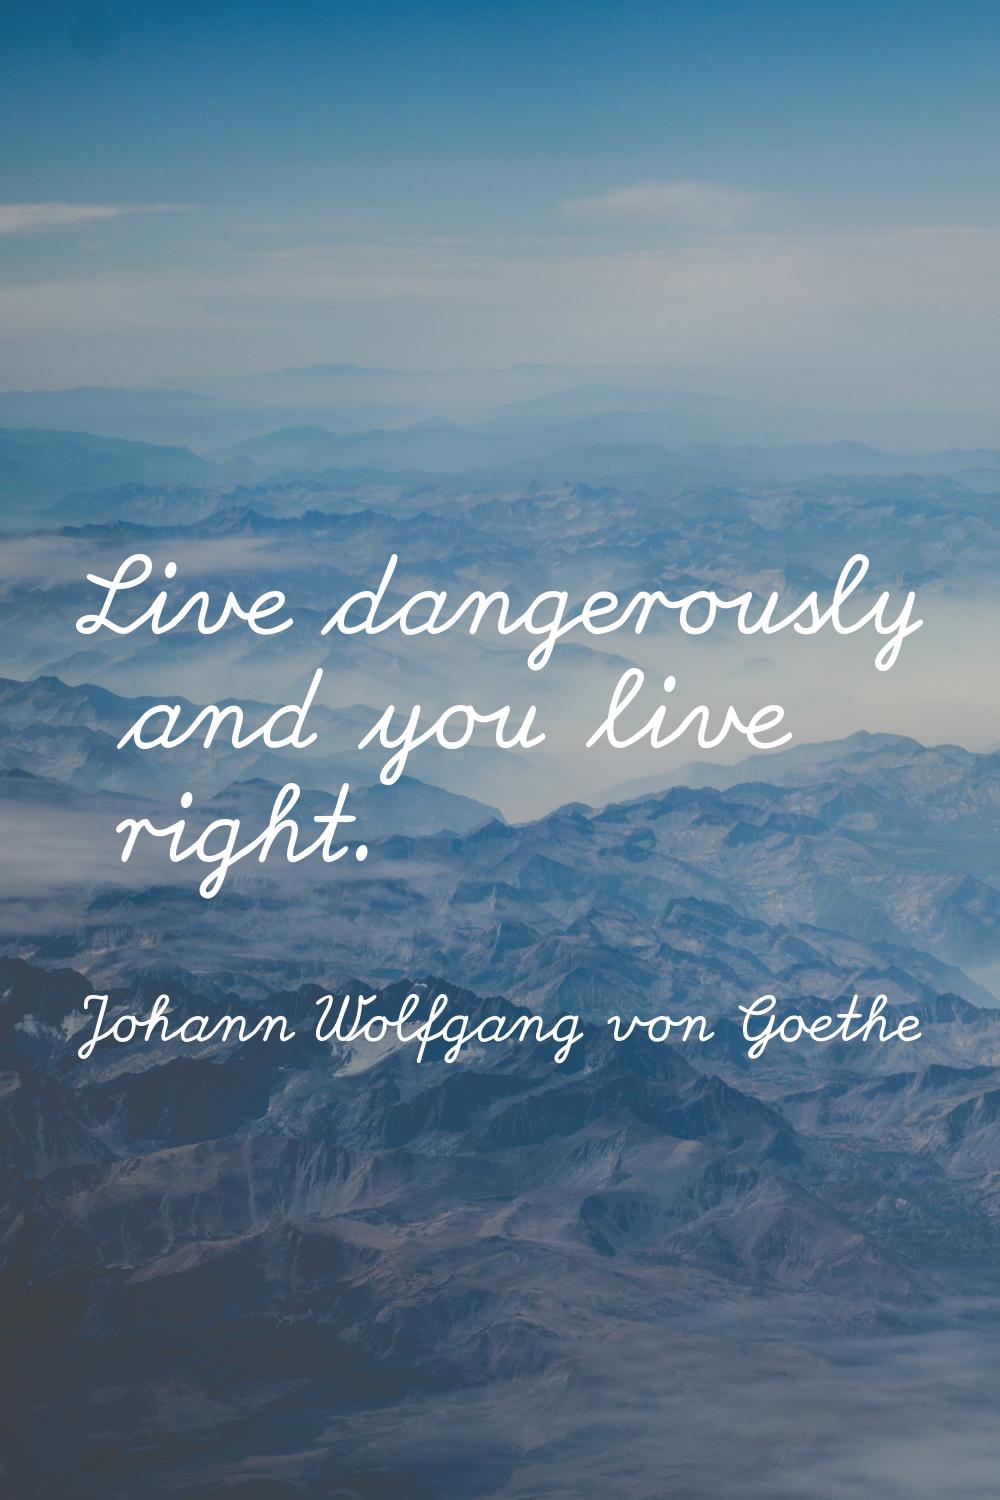 Live dangerously and you live right.